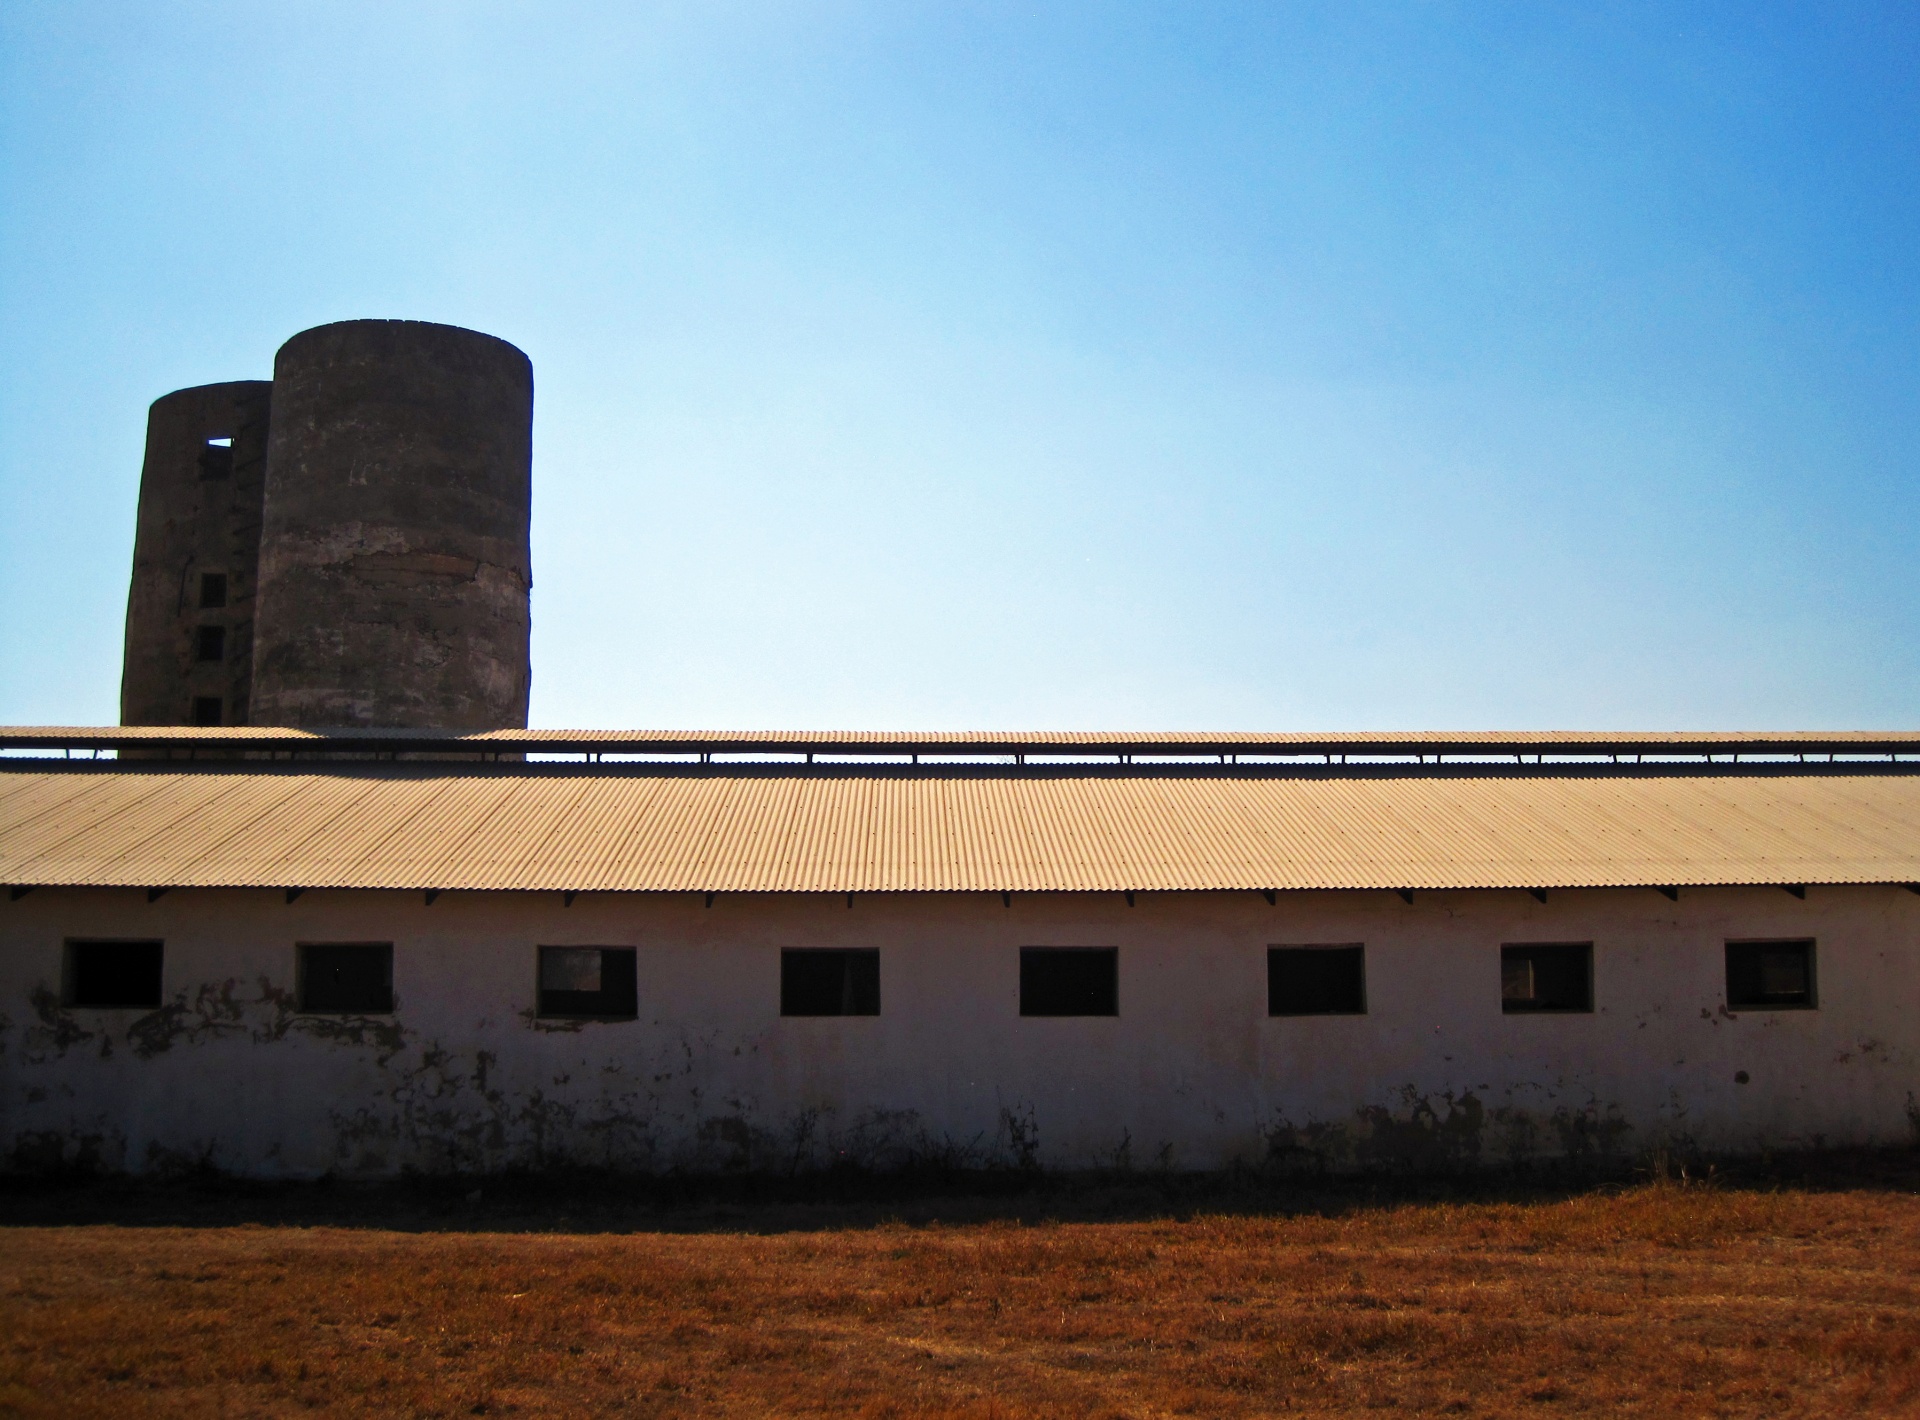 Farm Outbuilding With Two Old Silos